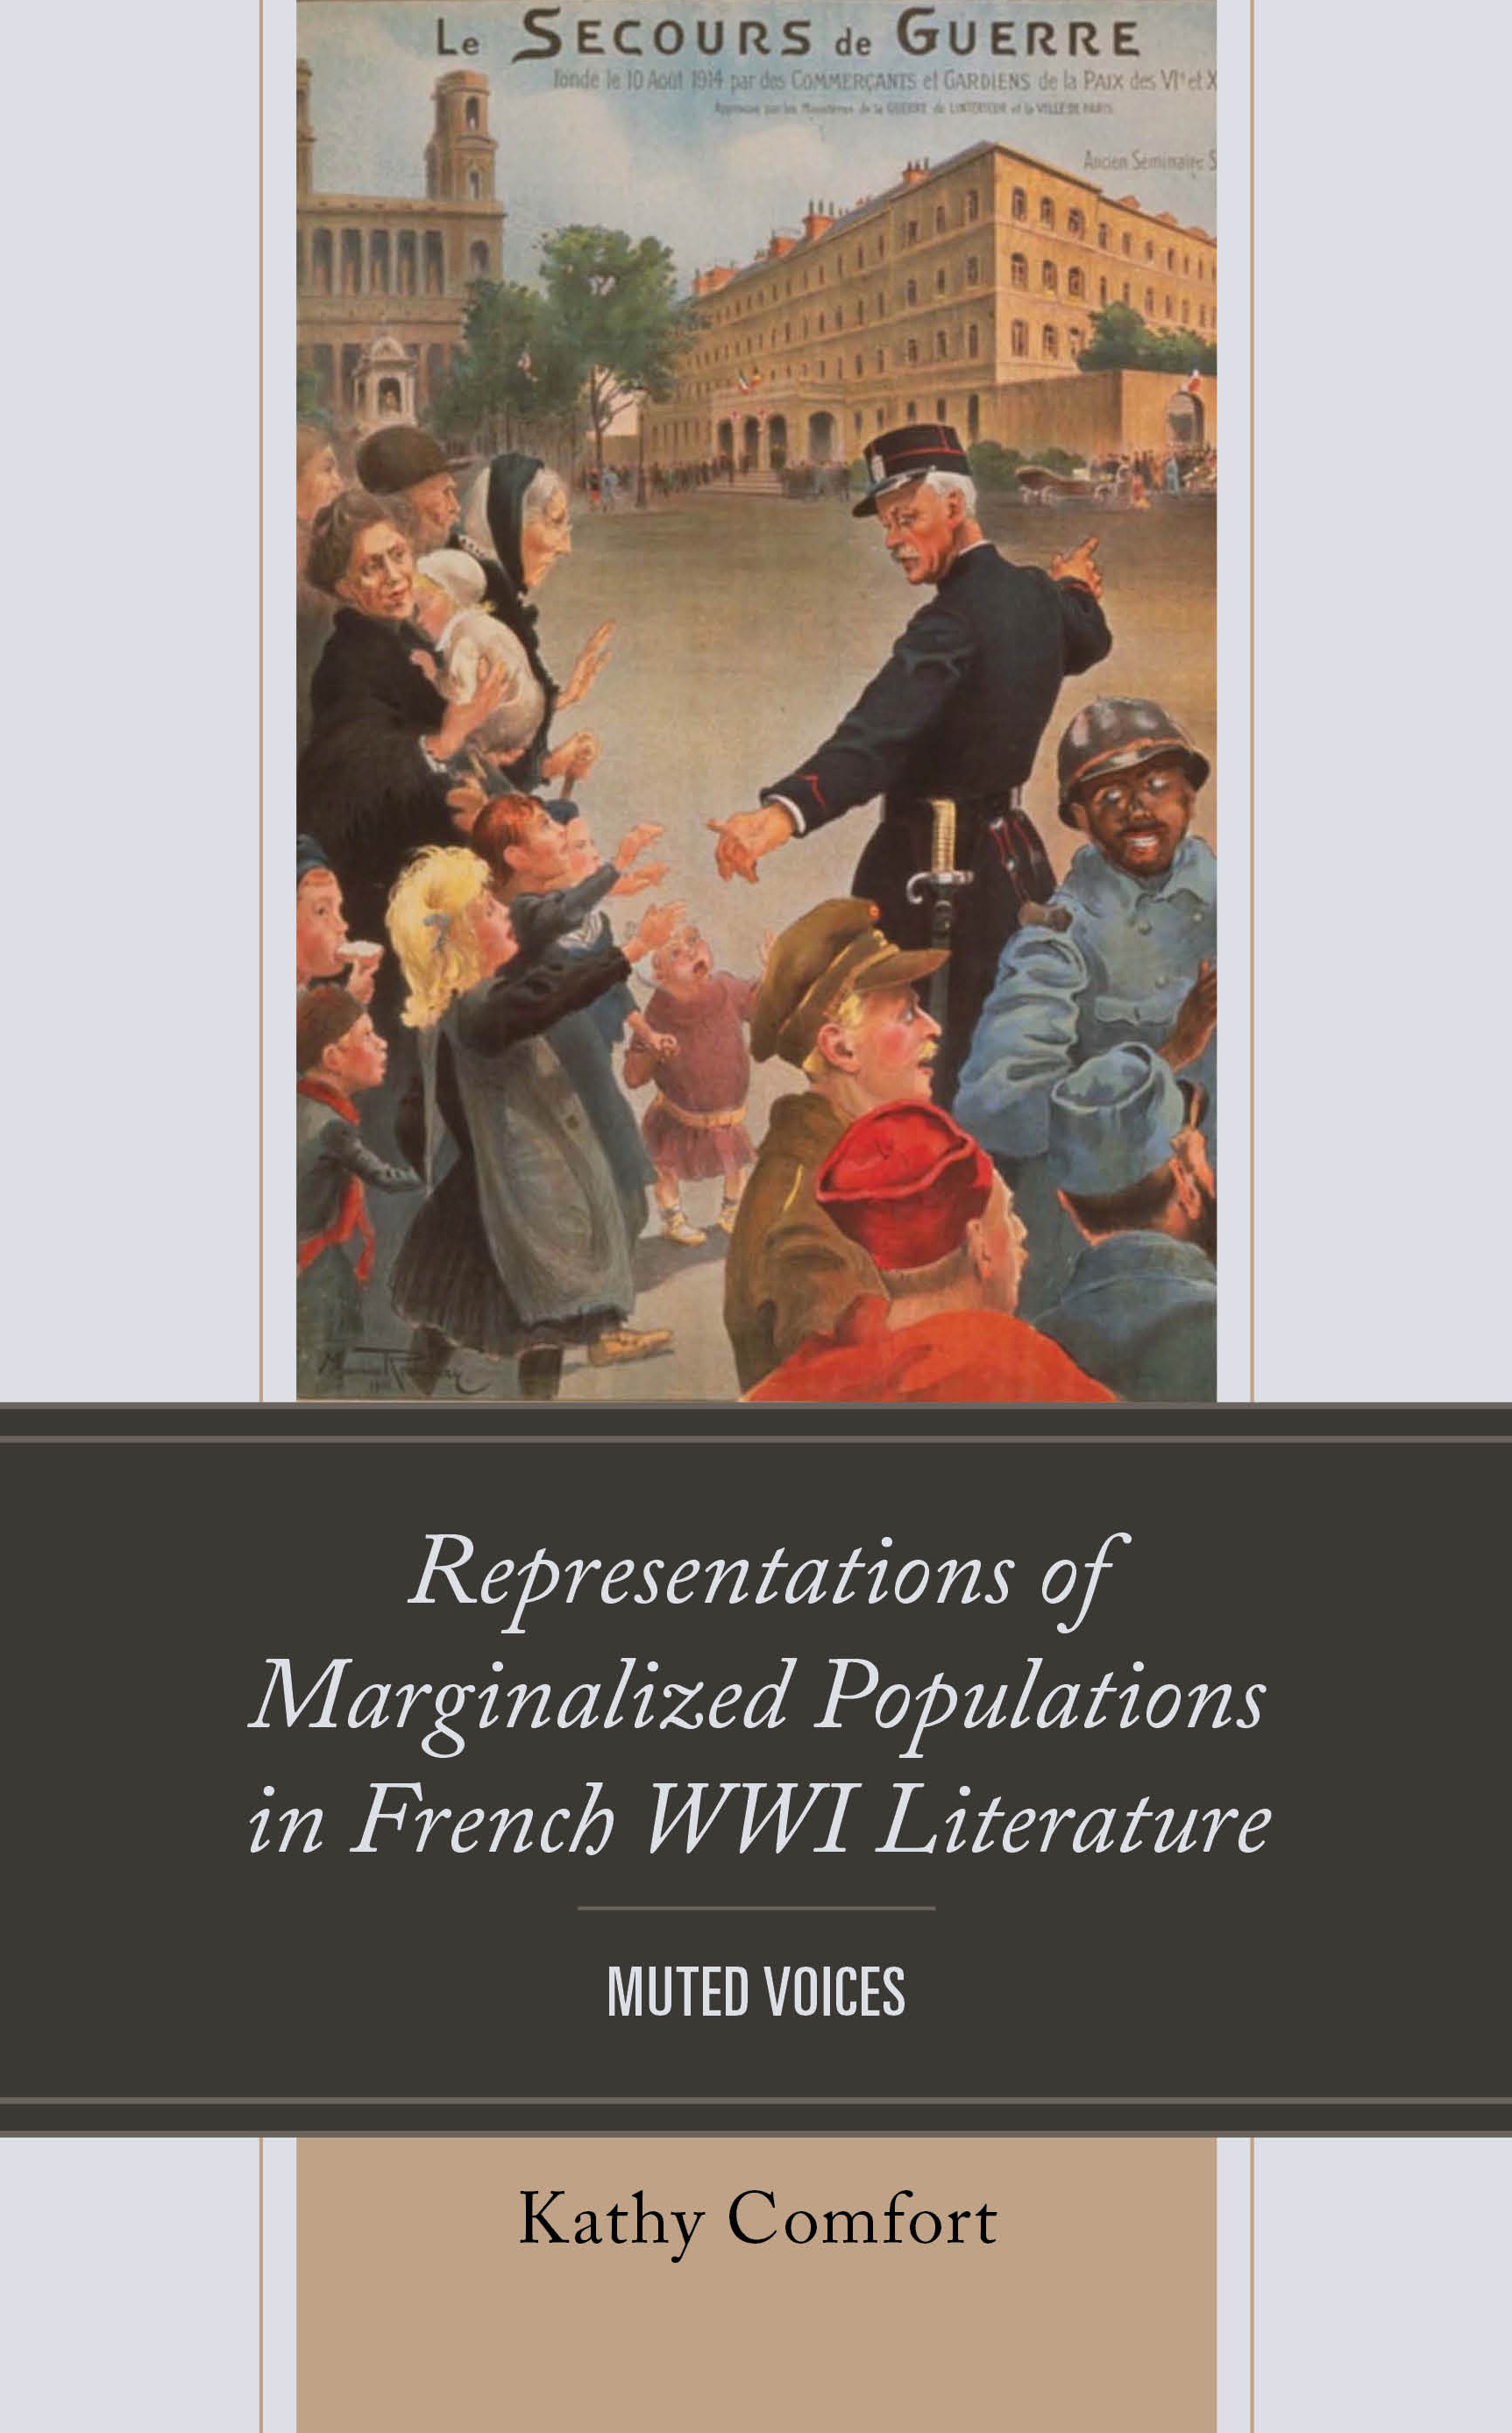 Representations of Marginalized Populations in French WWI Literature: Muted Voices